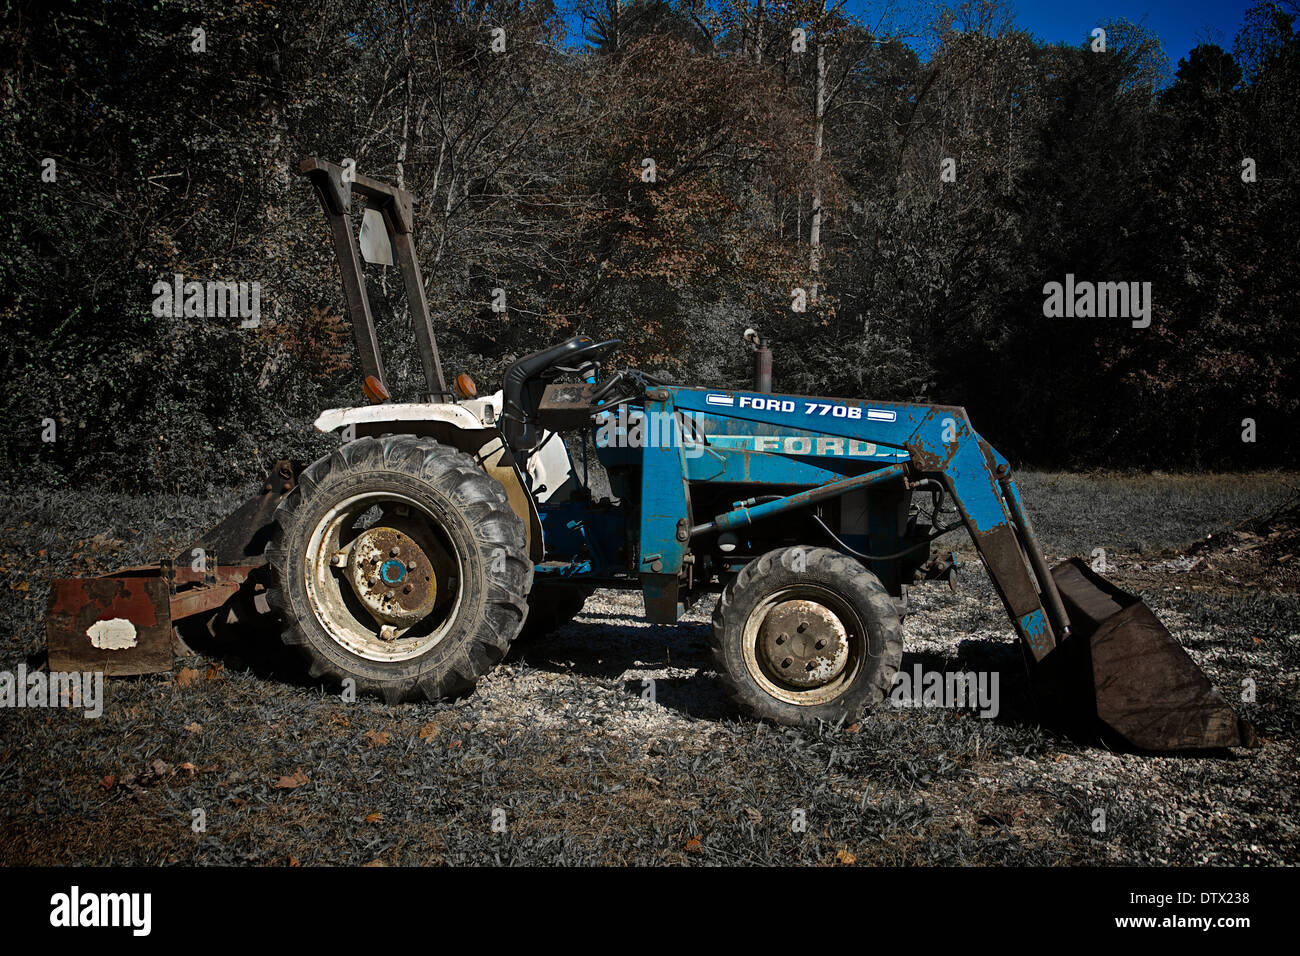 Old Ford Tractor in a Fall Setting Stock Photo